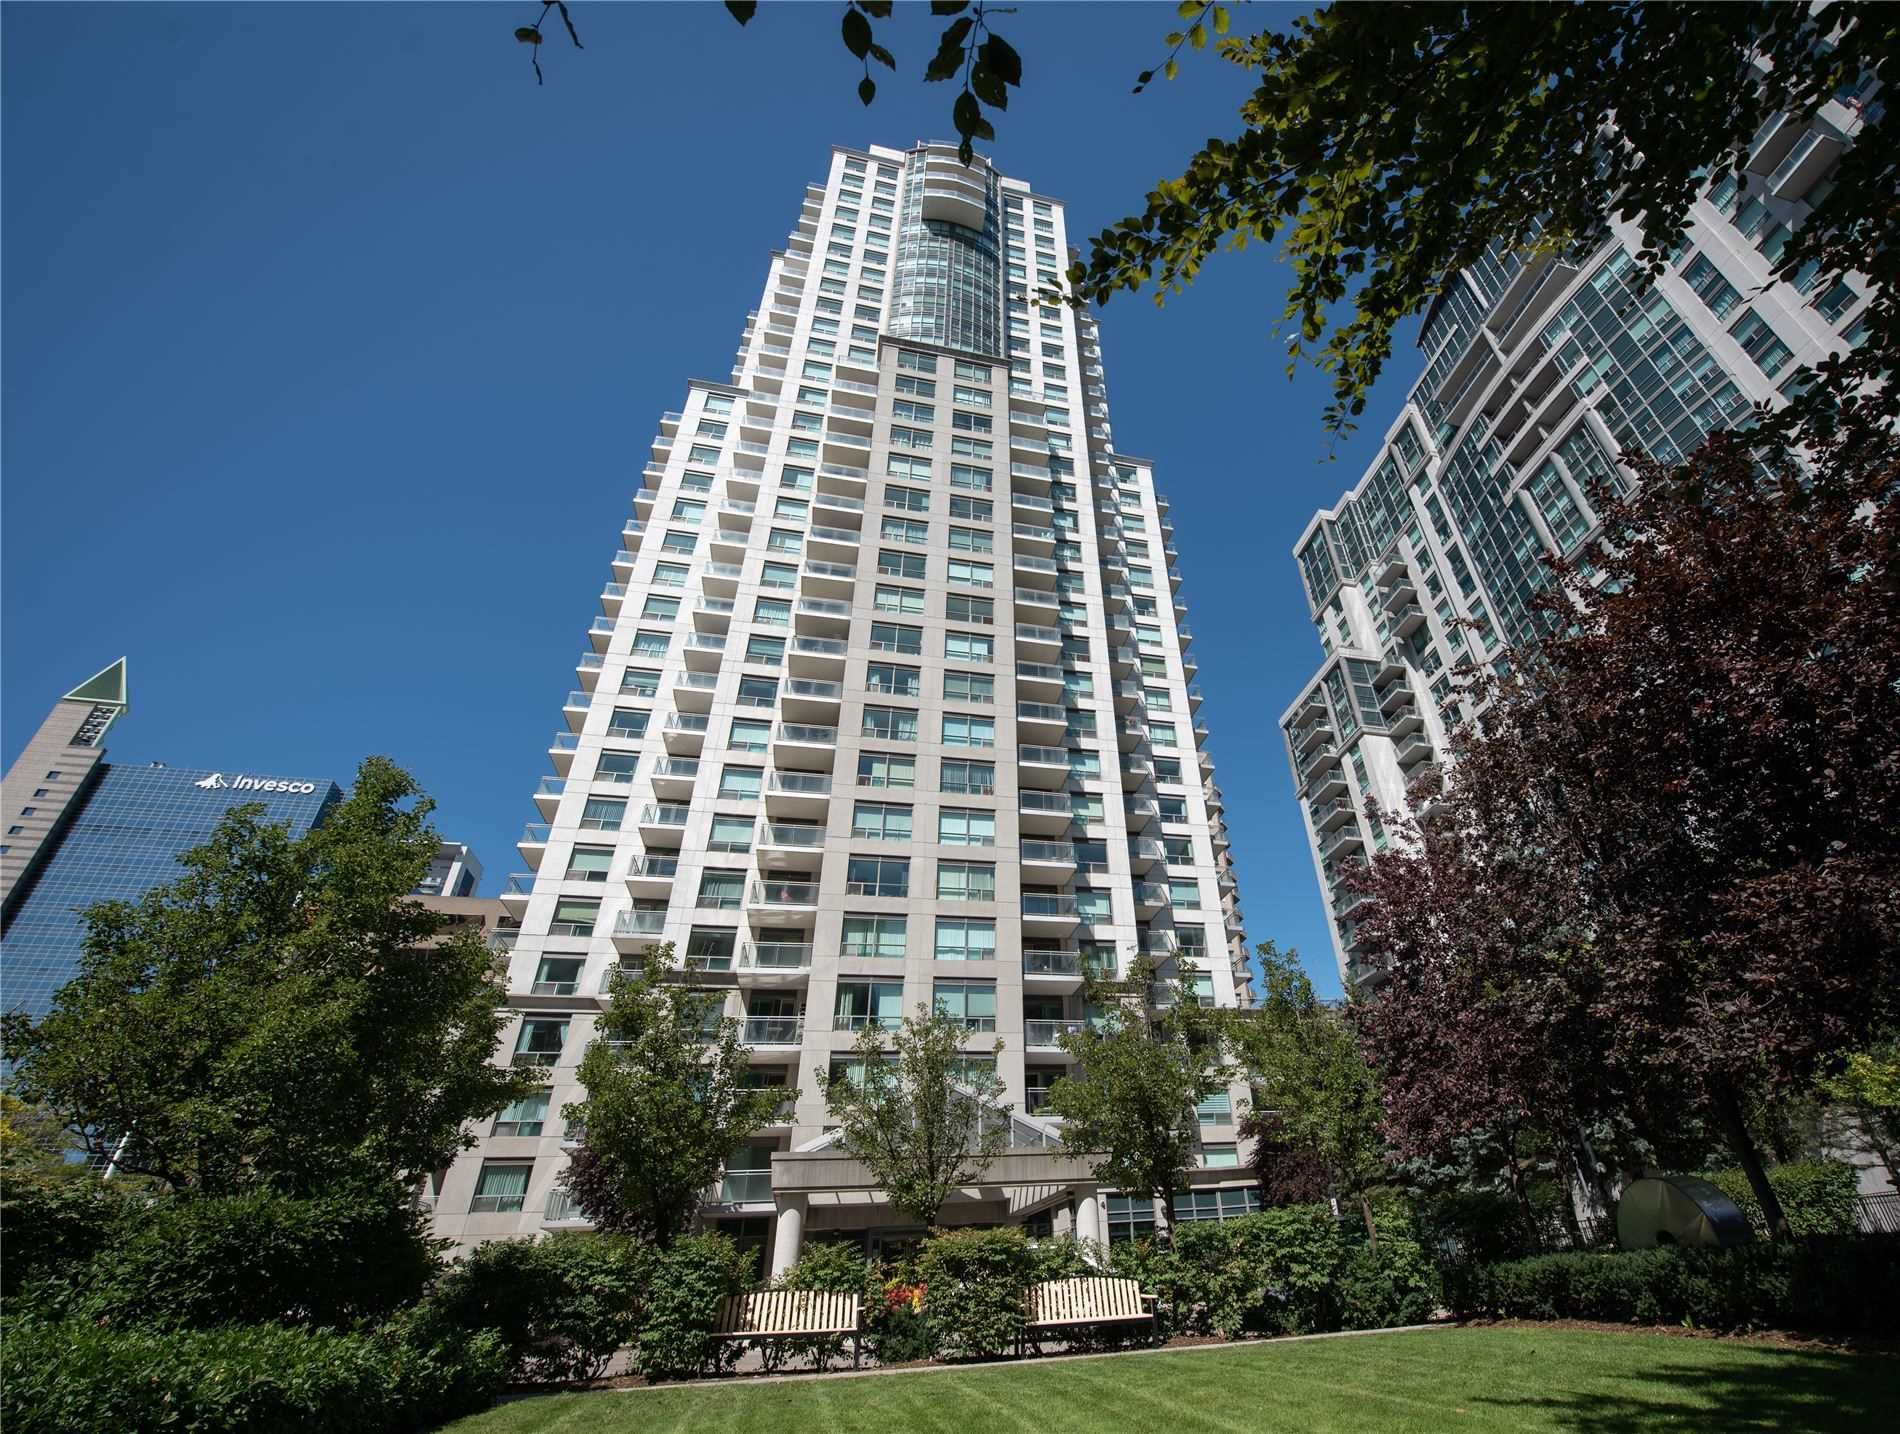 21 Hillcrest Ave. This condo at 21 Hillcrest Condos is located in  North York, Toronto - image #1 of 2 by Strata.ca